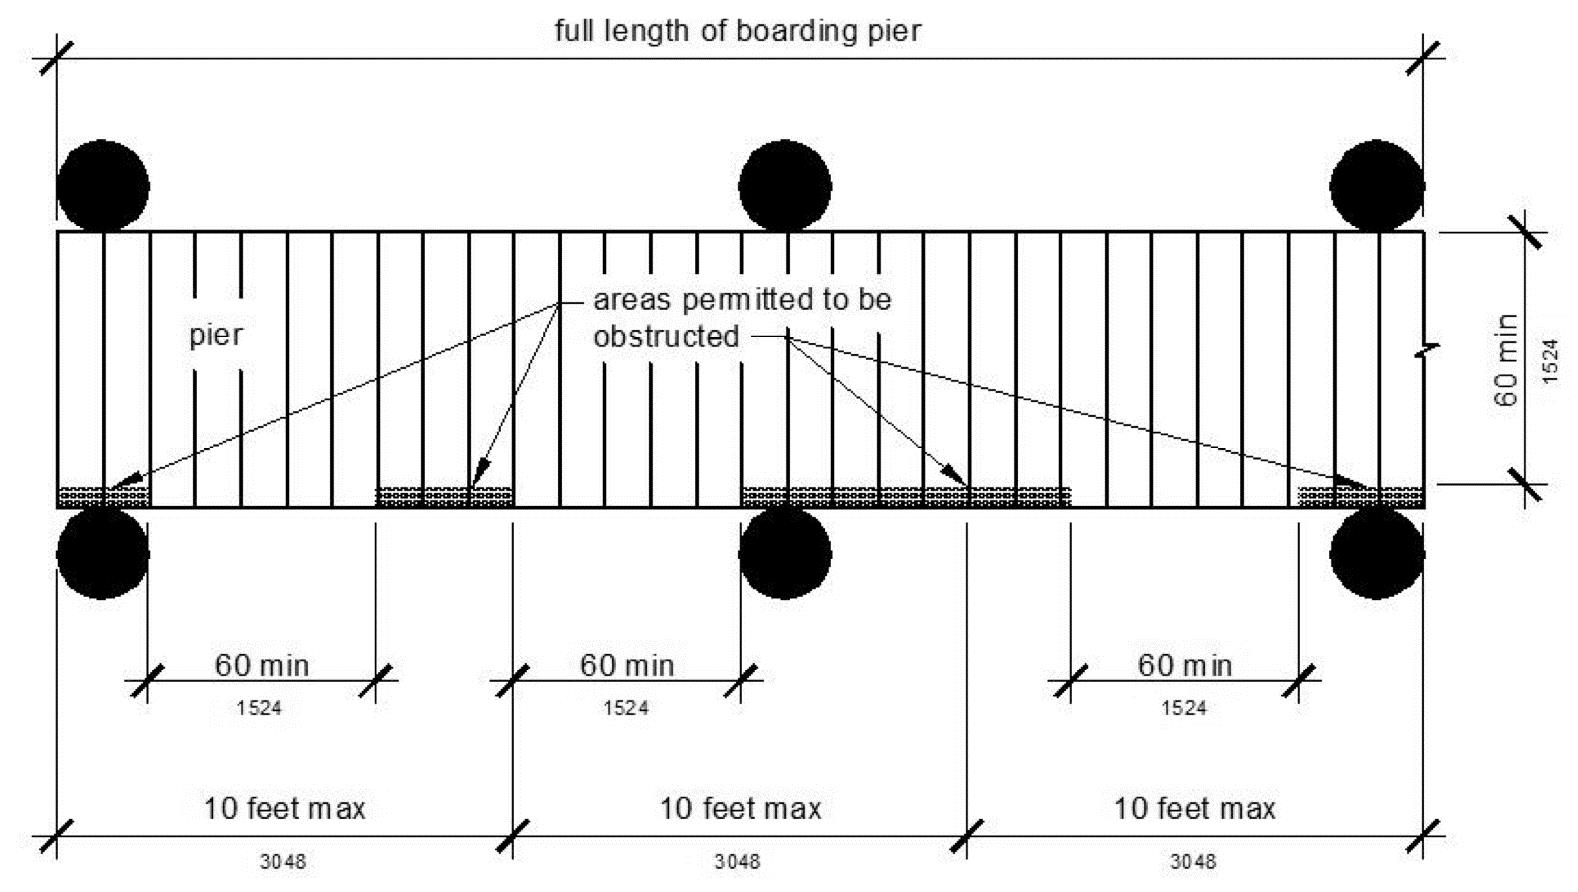 Pier clearances are shown in plan view.  Accessible boarding pier at a boat launch ramp has clear pier space 60 inches long minimum, the full length of the boarding pier.  Every 10 feet maximum of linear pier edge contains at least one continuous clear opening 60 inches long minimum.